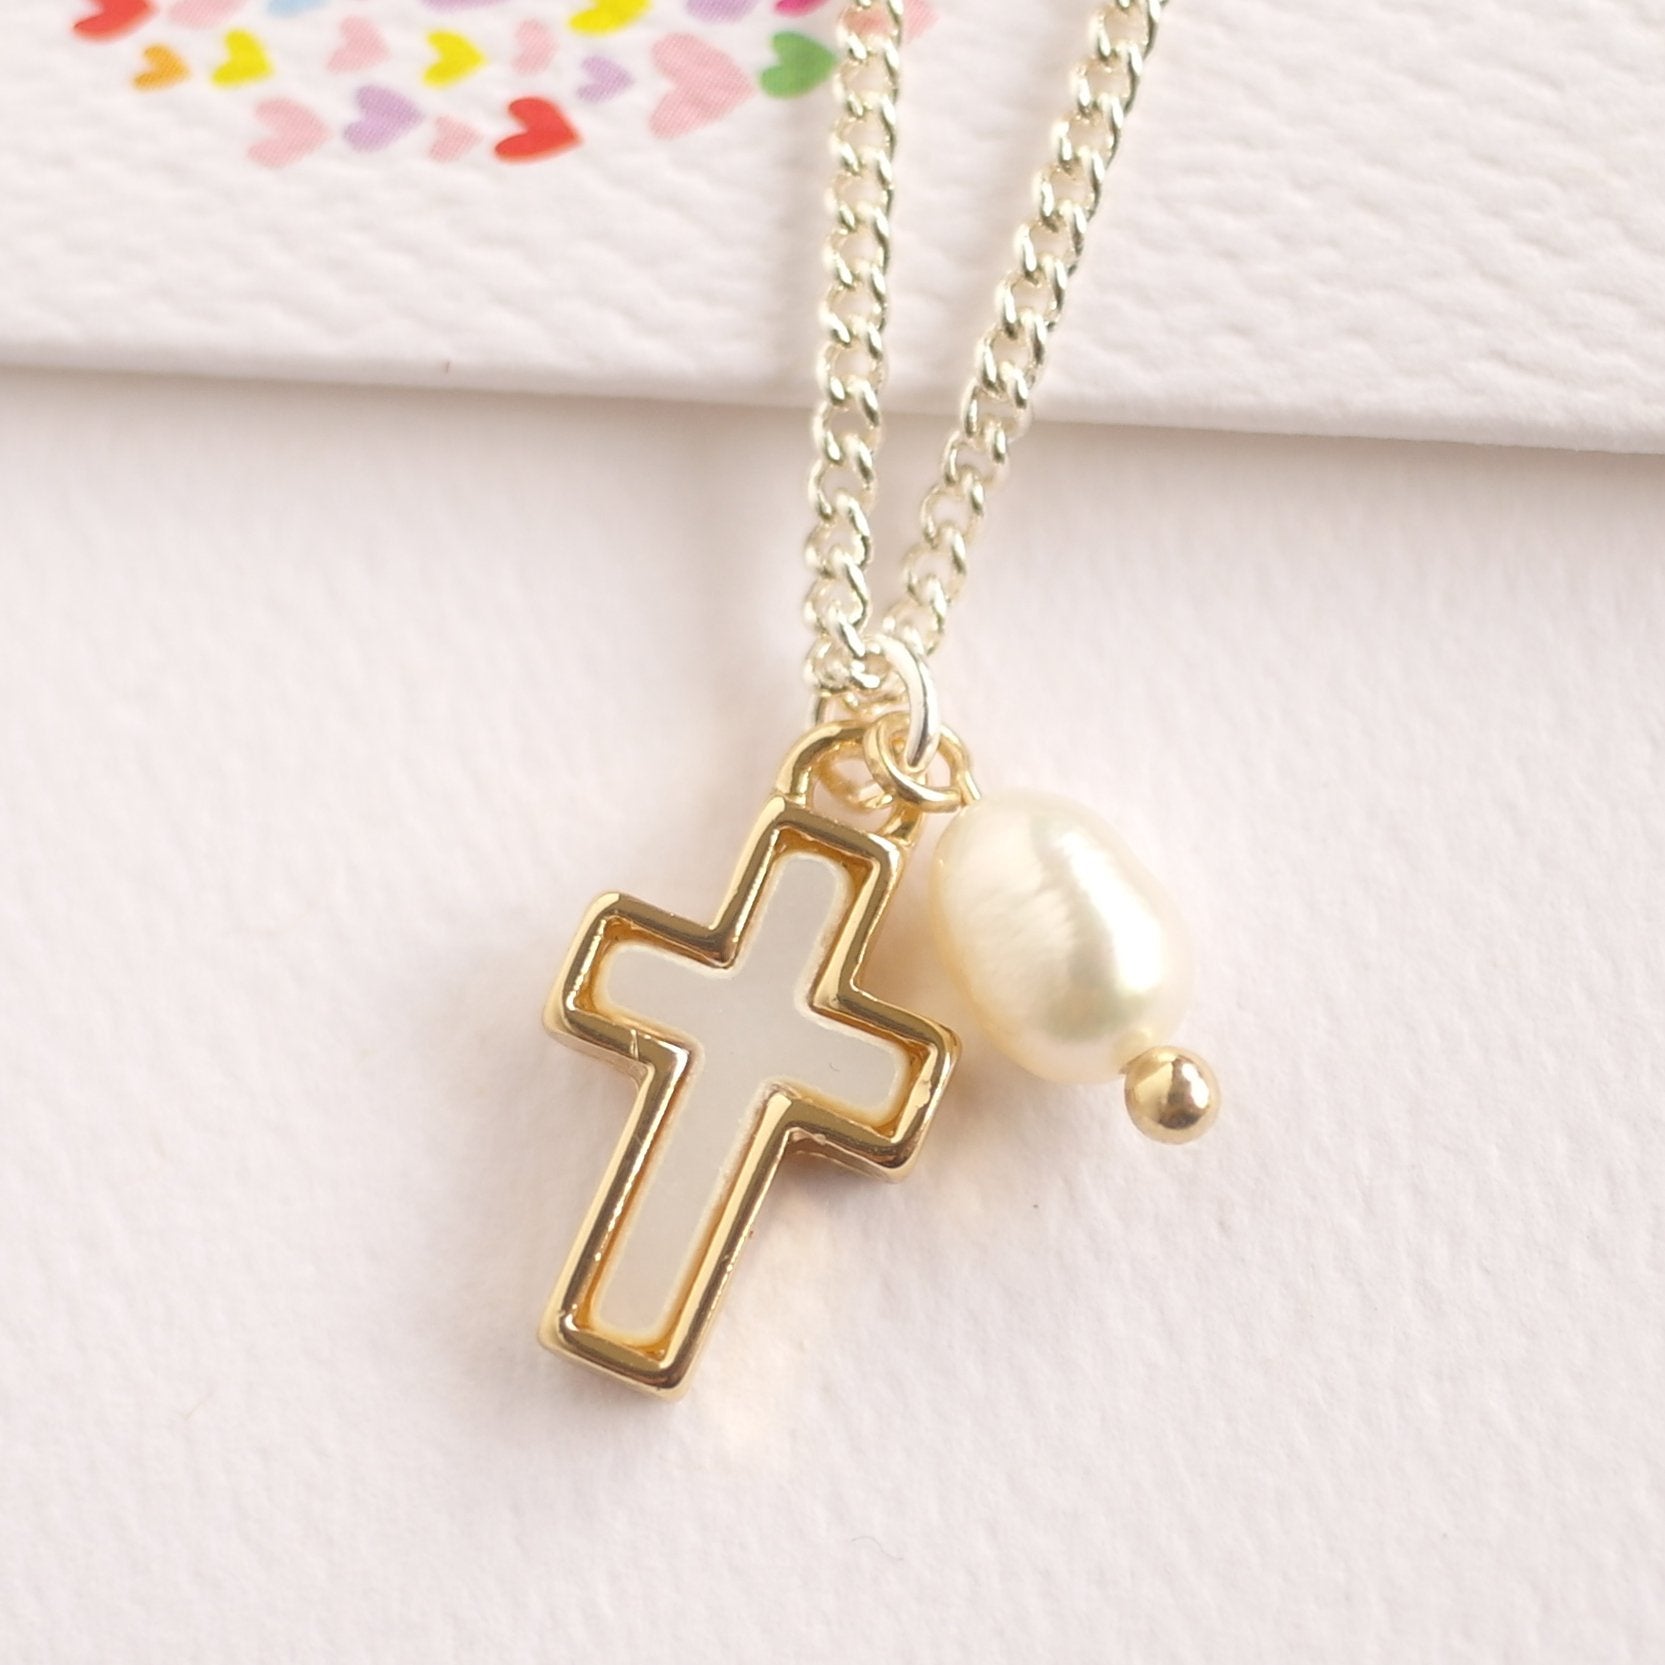 Lauren Hinkley - Mother of Pearl Cross Necklace with Fresh Water Pearl